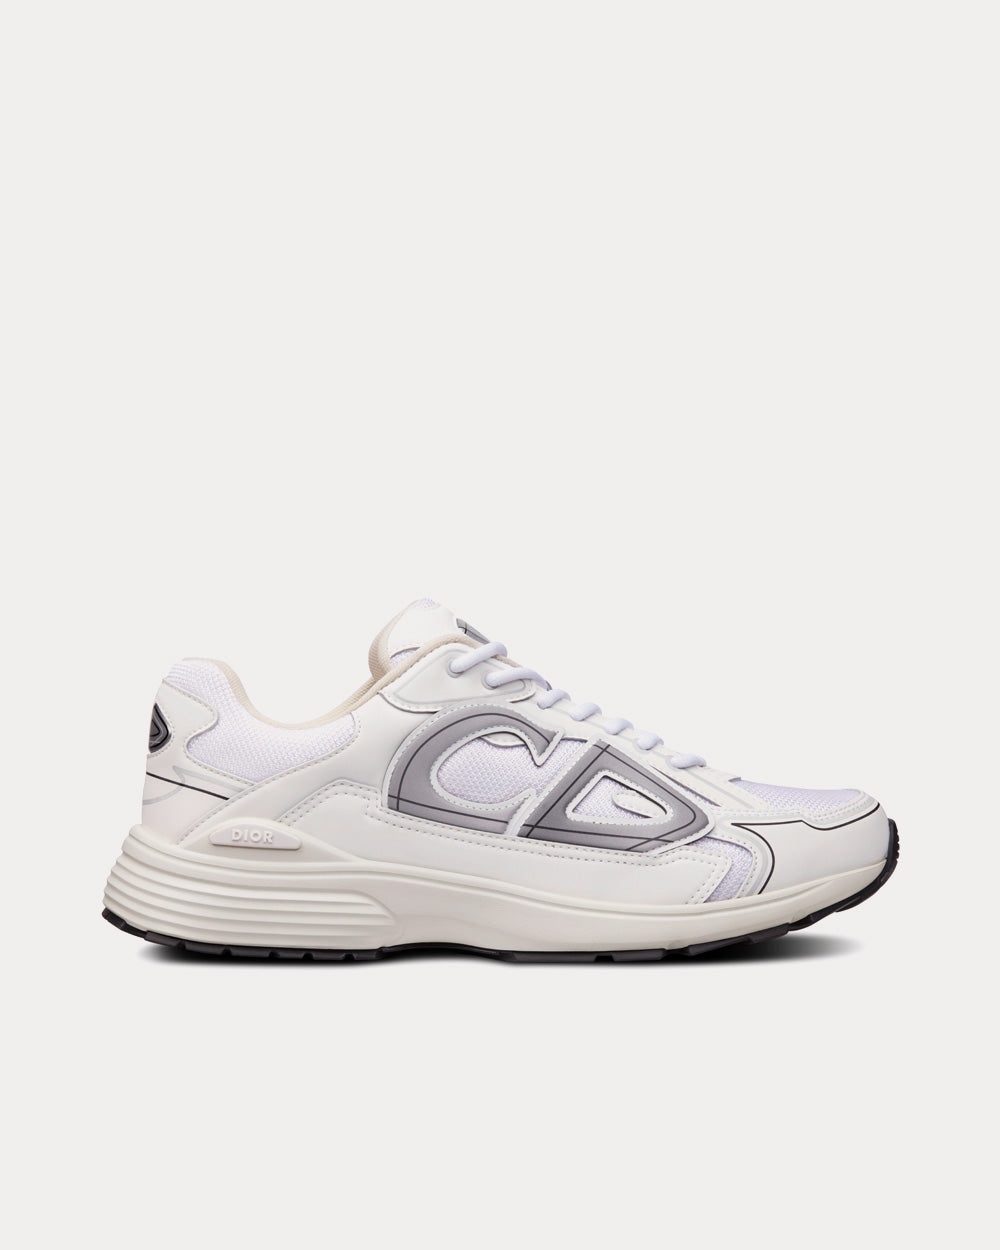 Dior B30 White Mesh and Technical Fabric Low Top Sneakers - Sneak in Peace